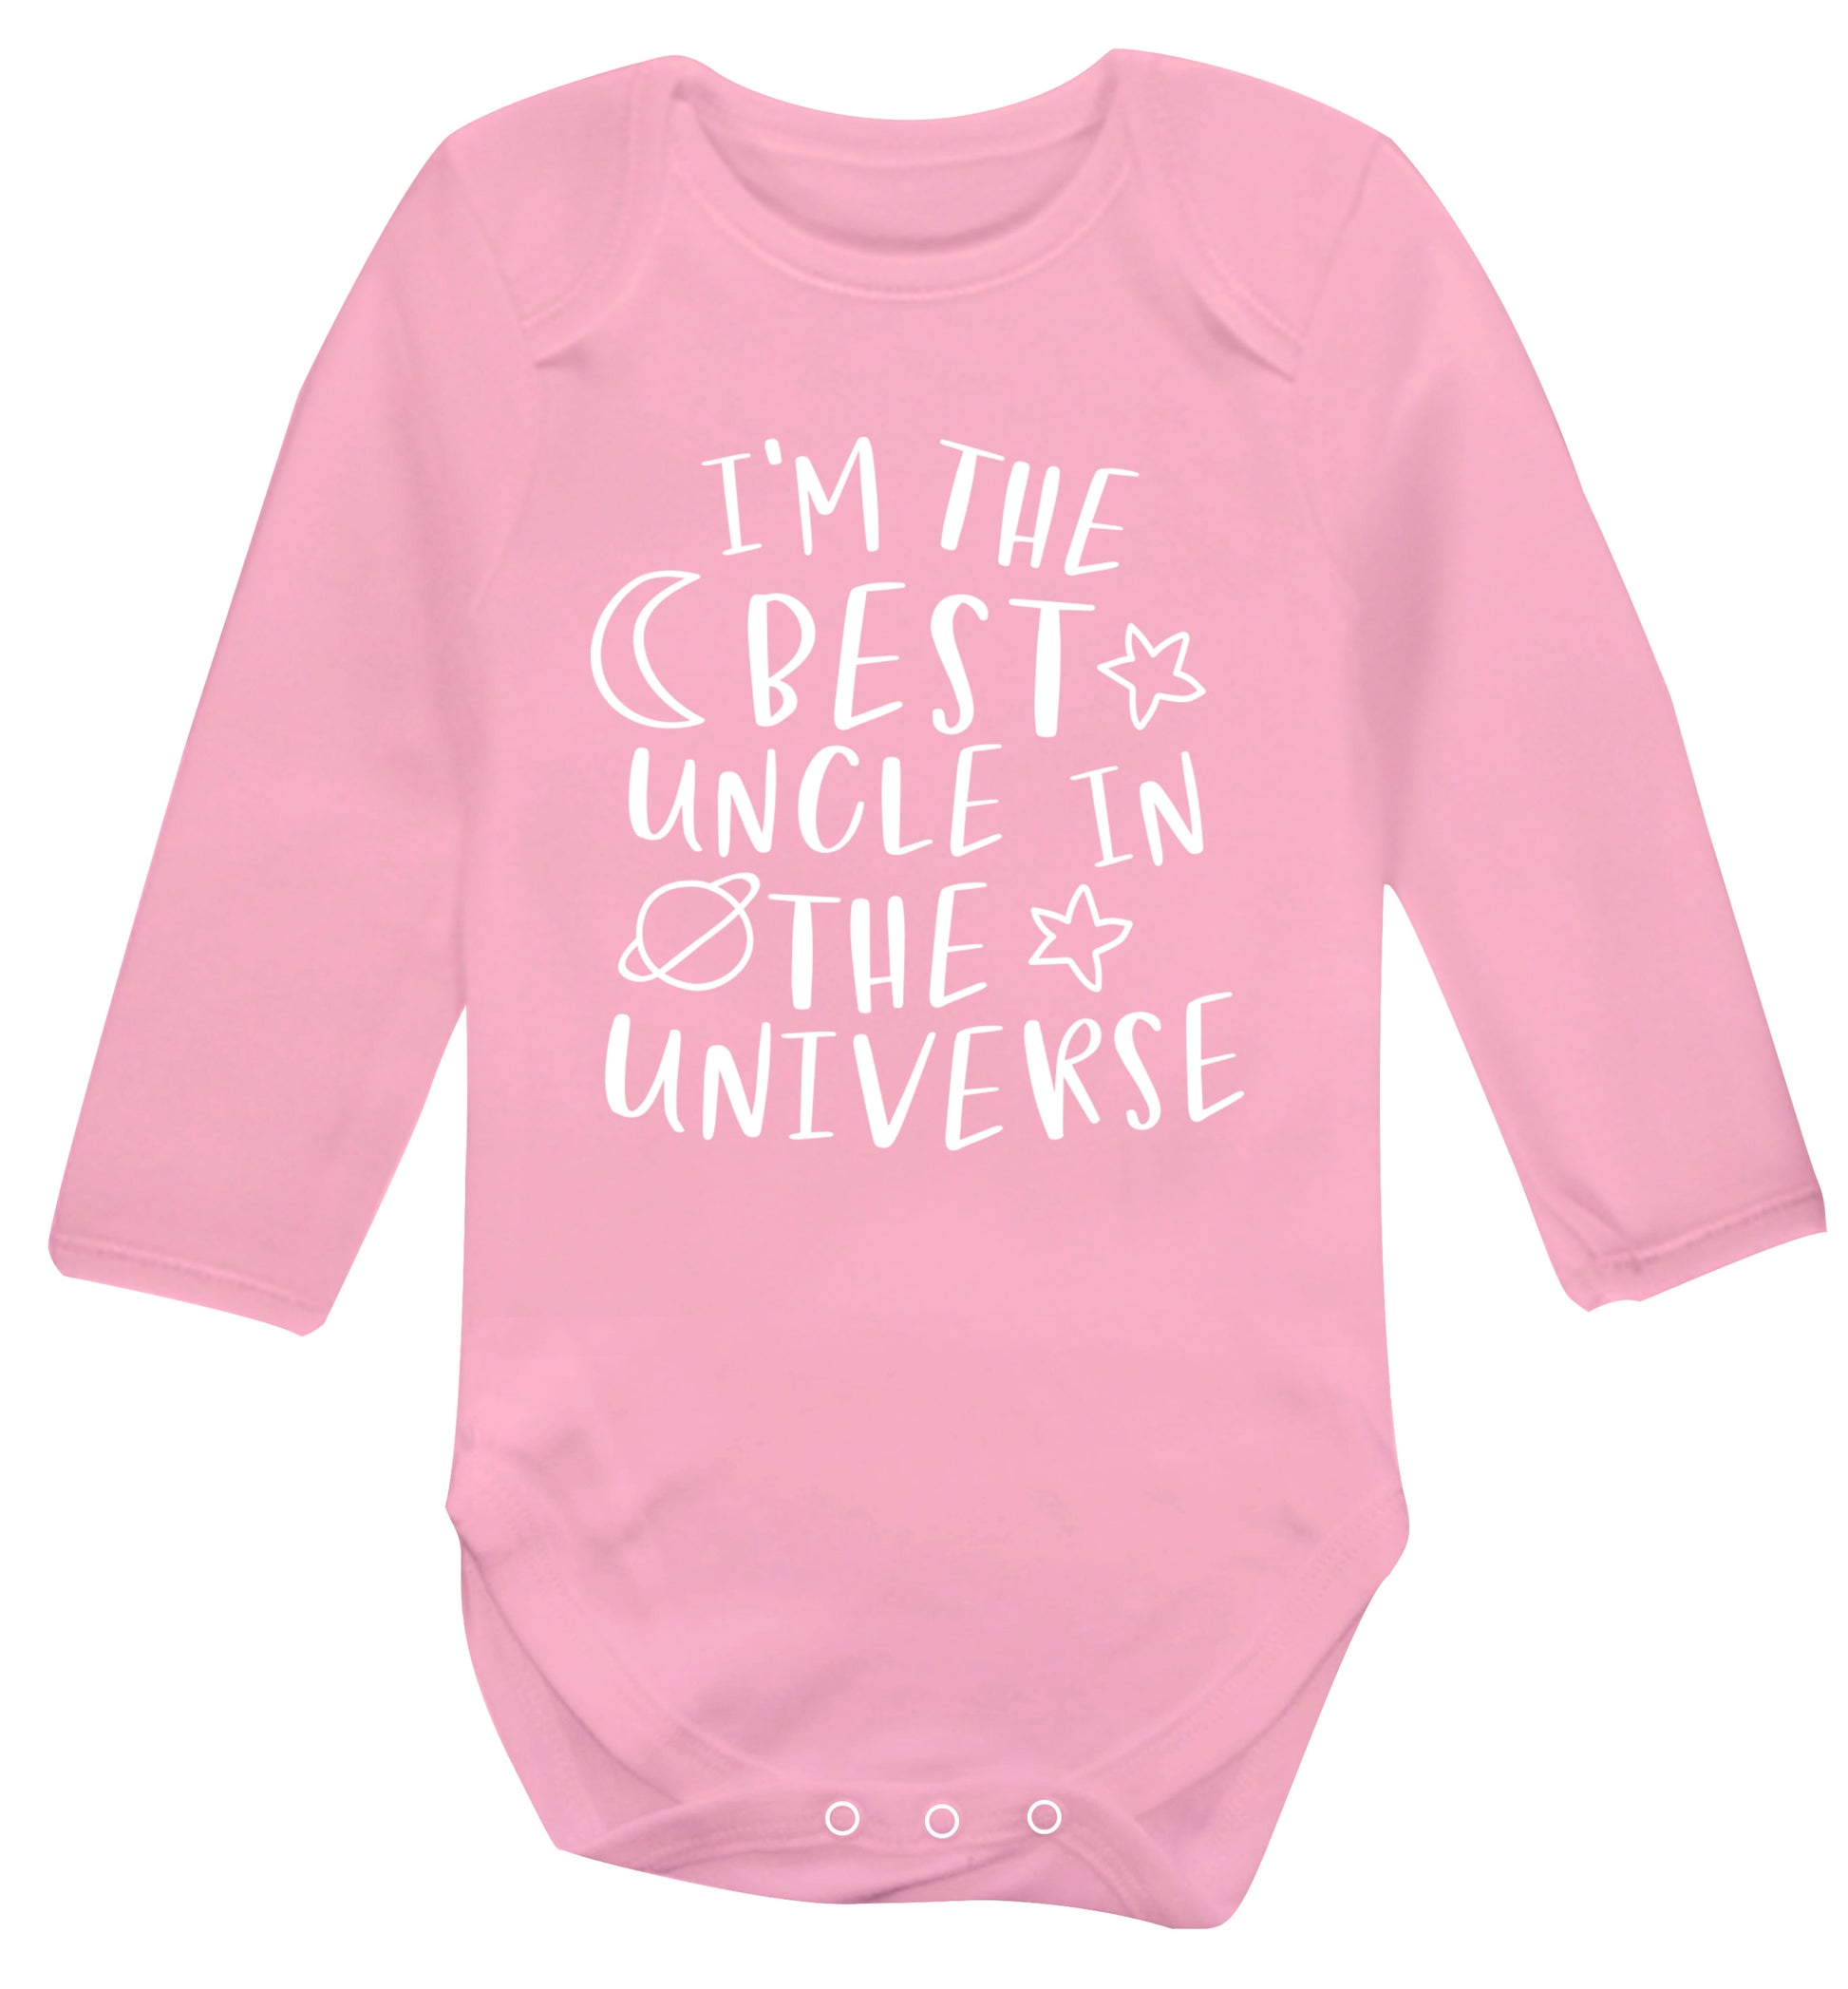 I'm the best uncle in the universe Baby Vest long sleeved pale pink 6-12 months